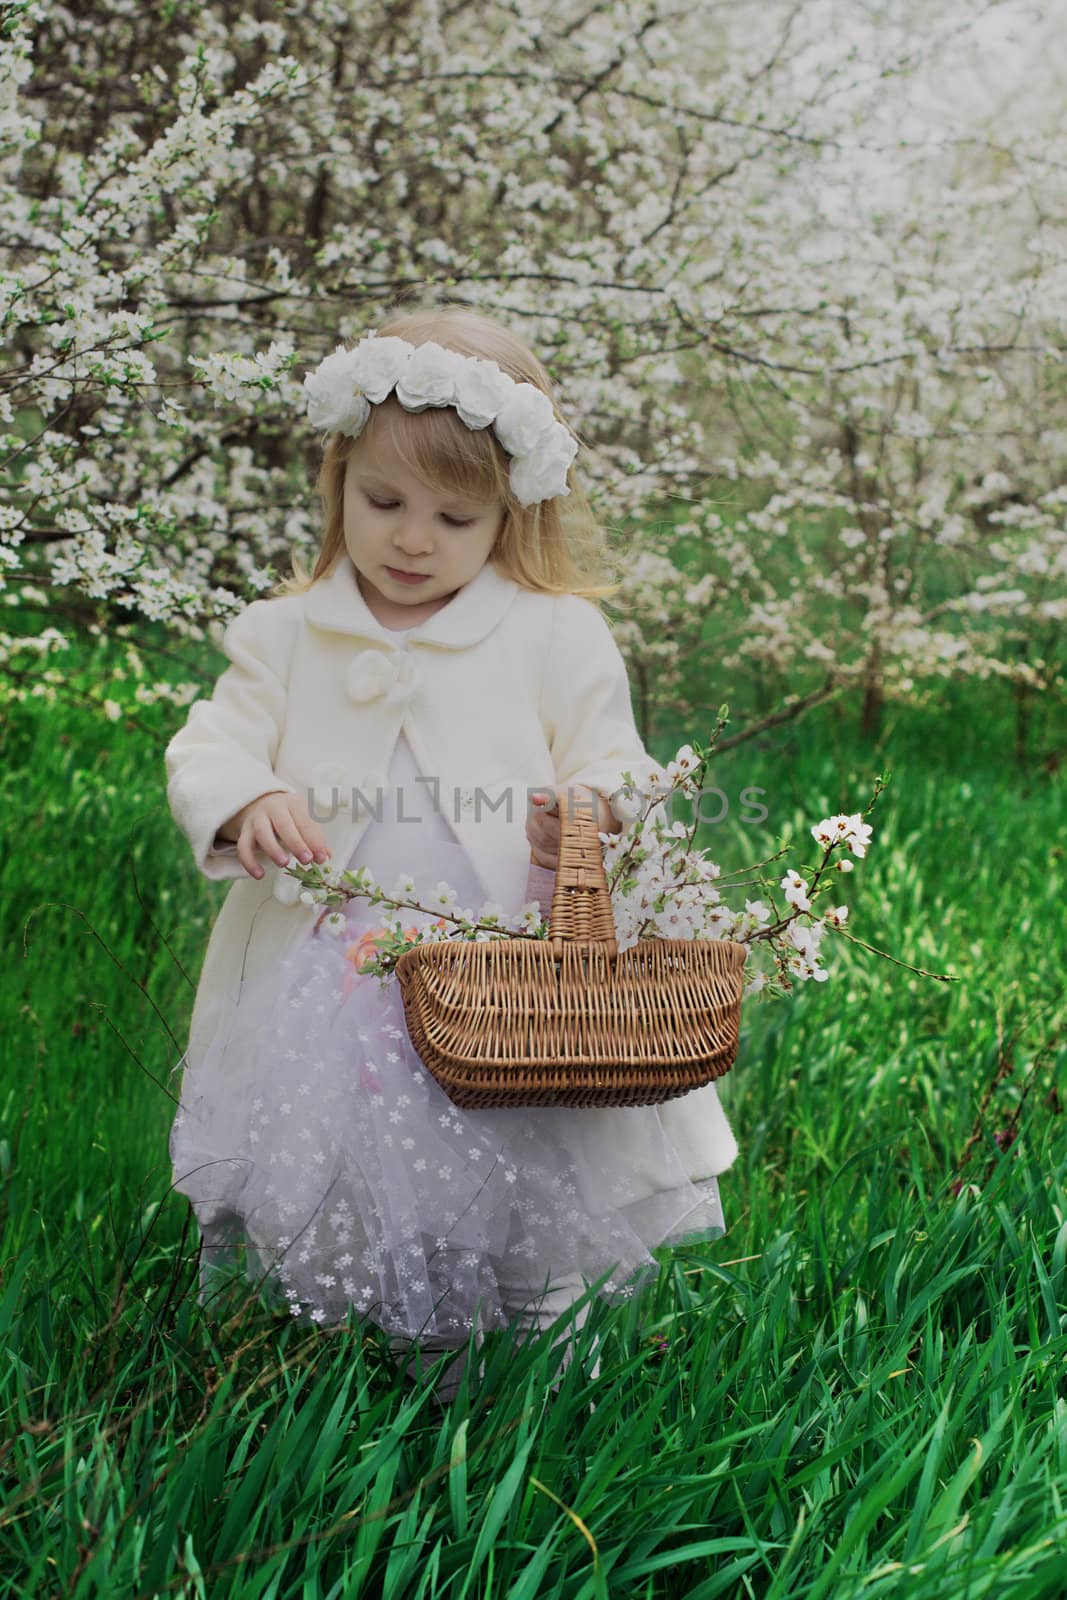 Baby with basket walking in spring blossom garden